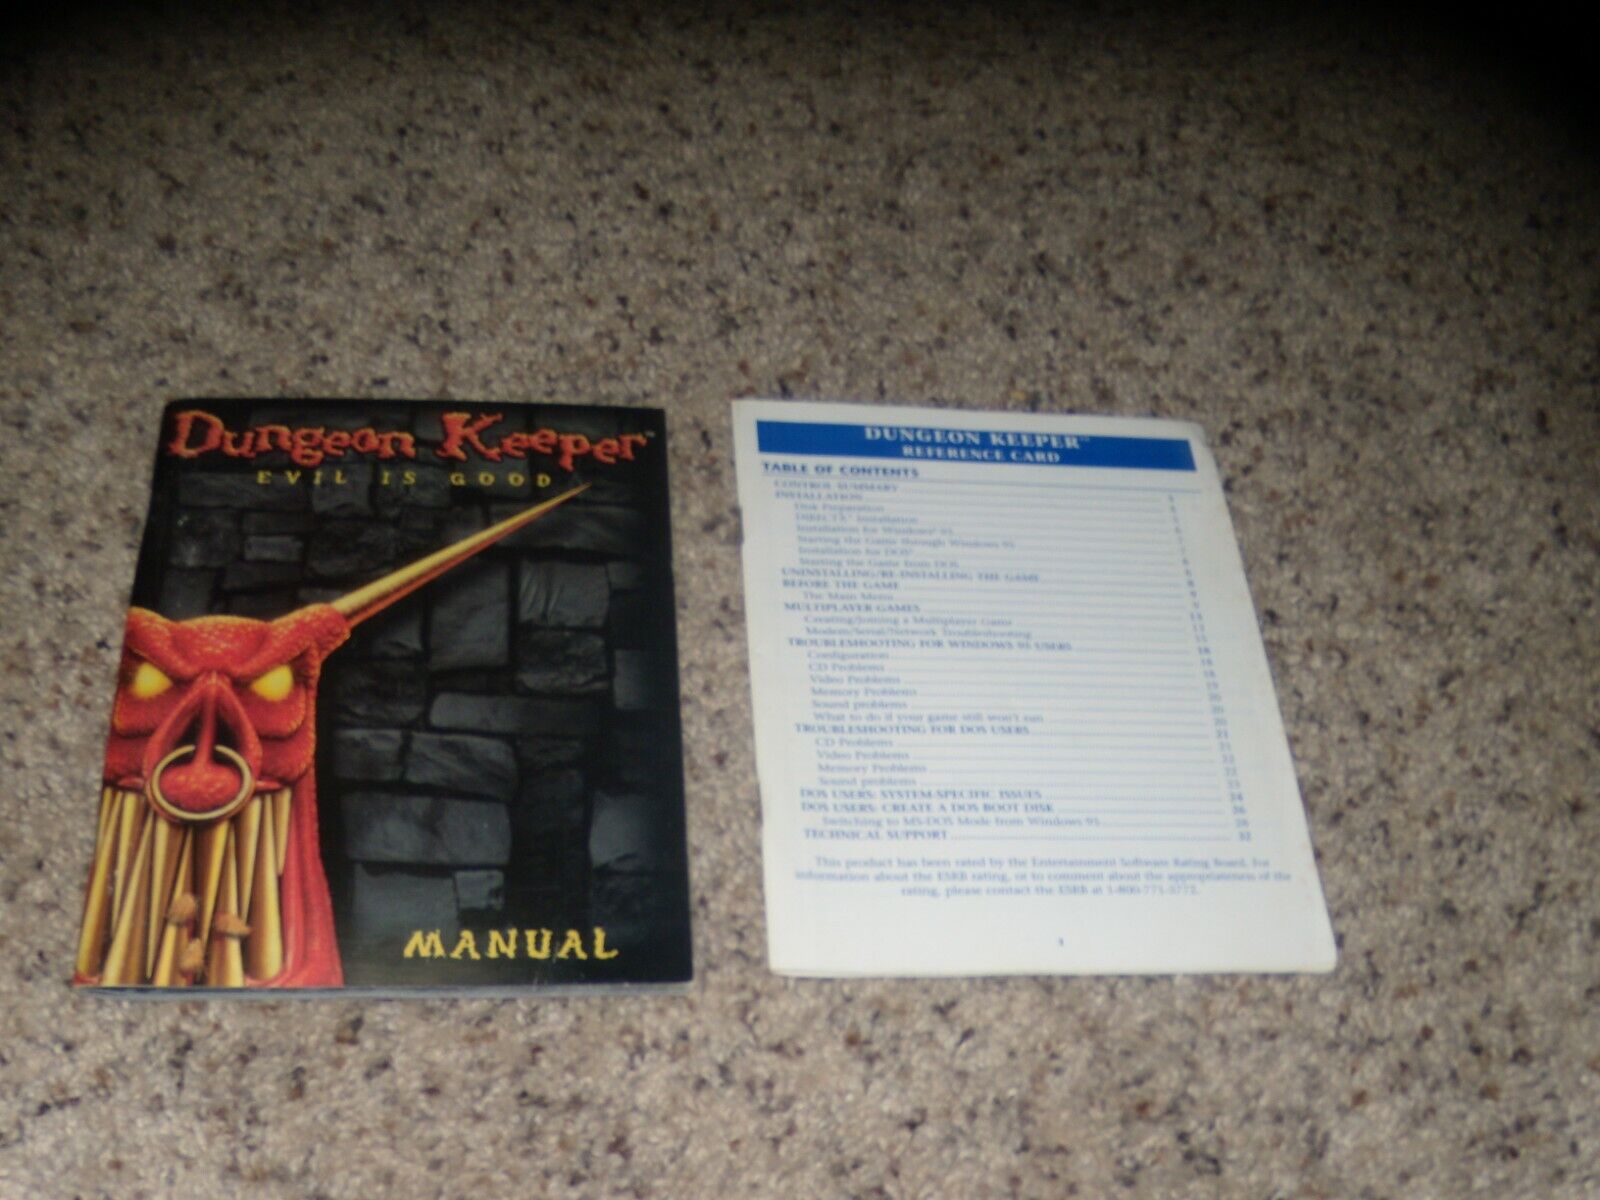 Dungeon Keeper Evil Is Good manual and reference card - No Game